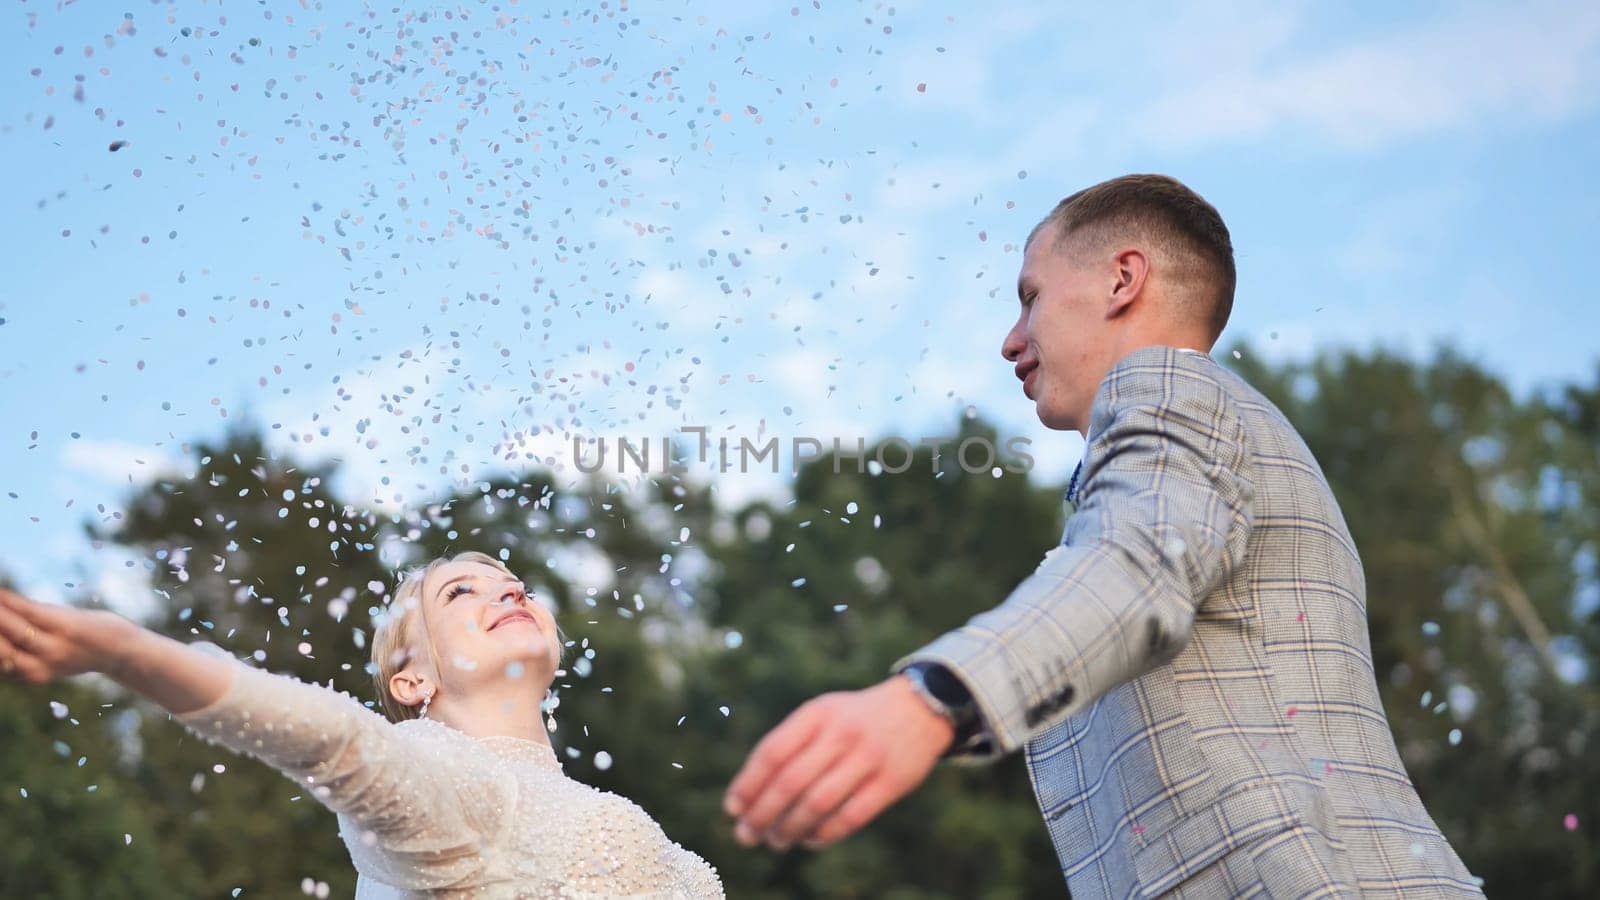 The bride and groom toss confetti above them and embrace